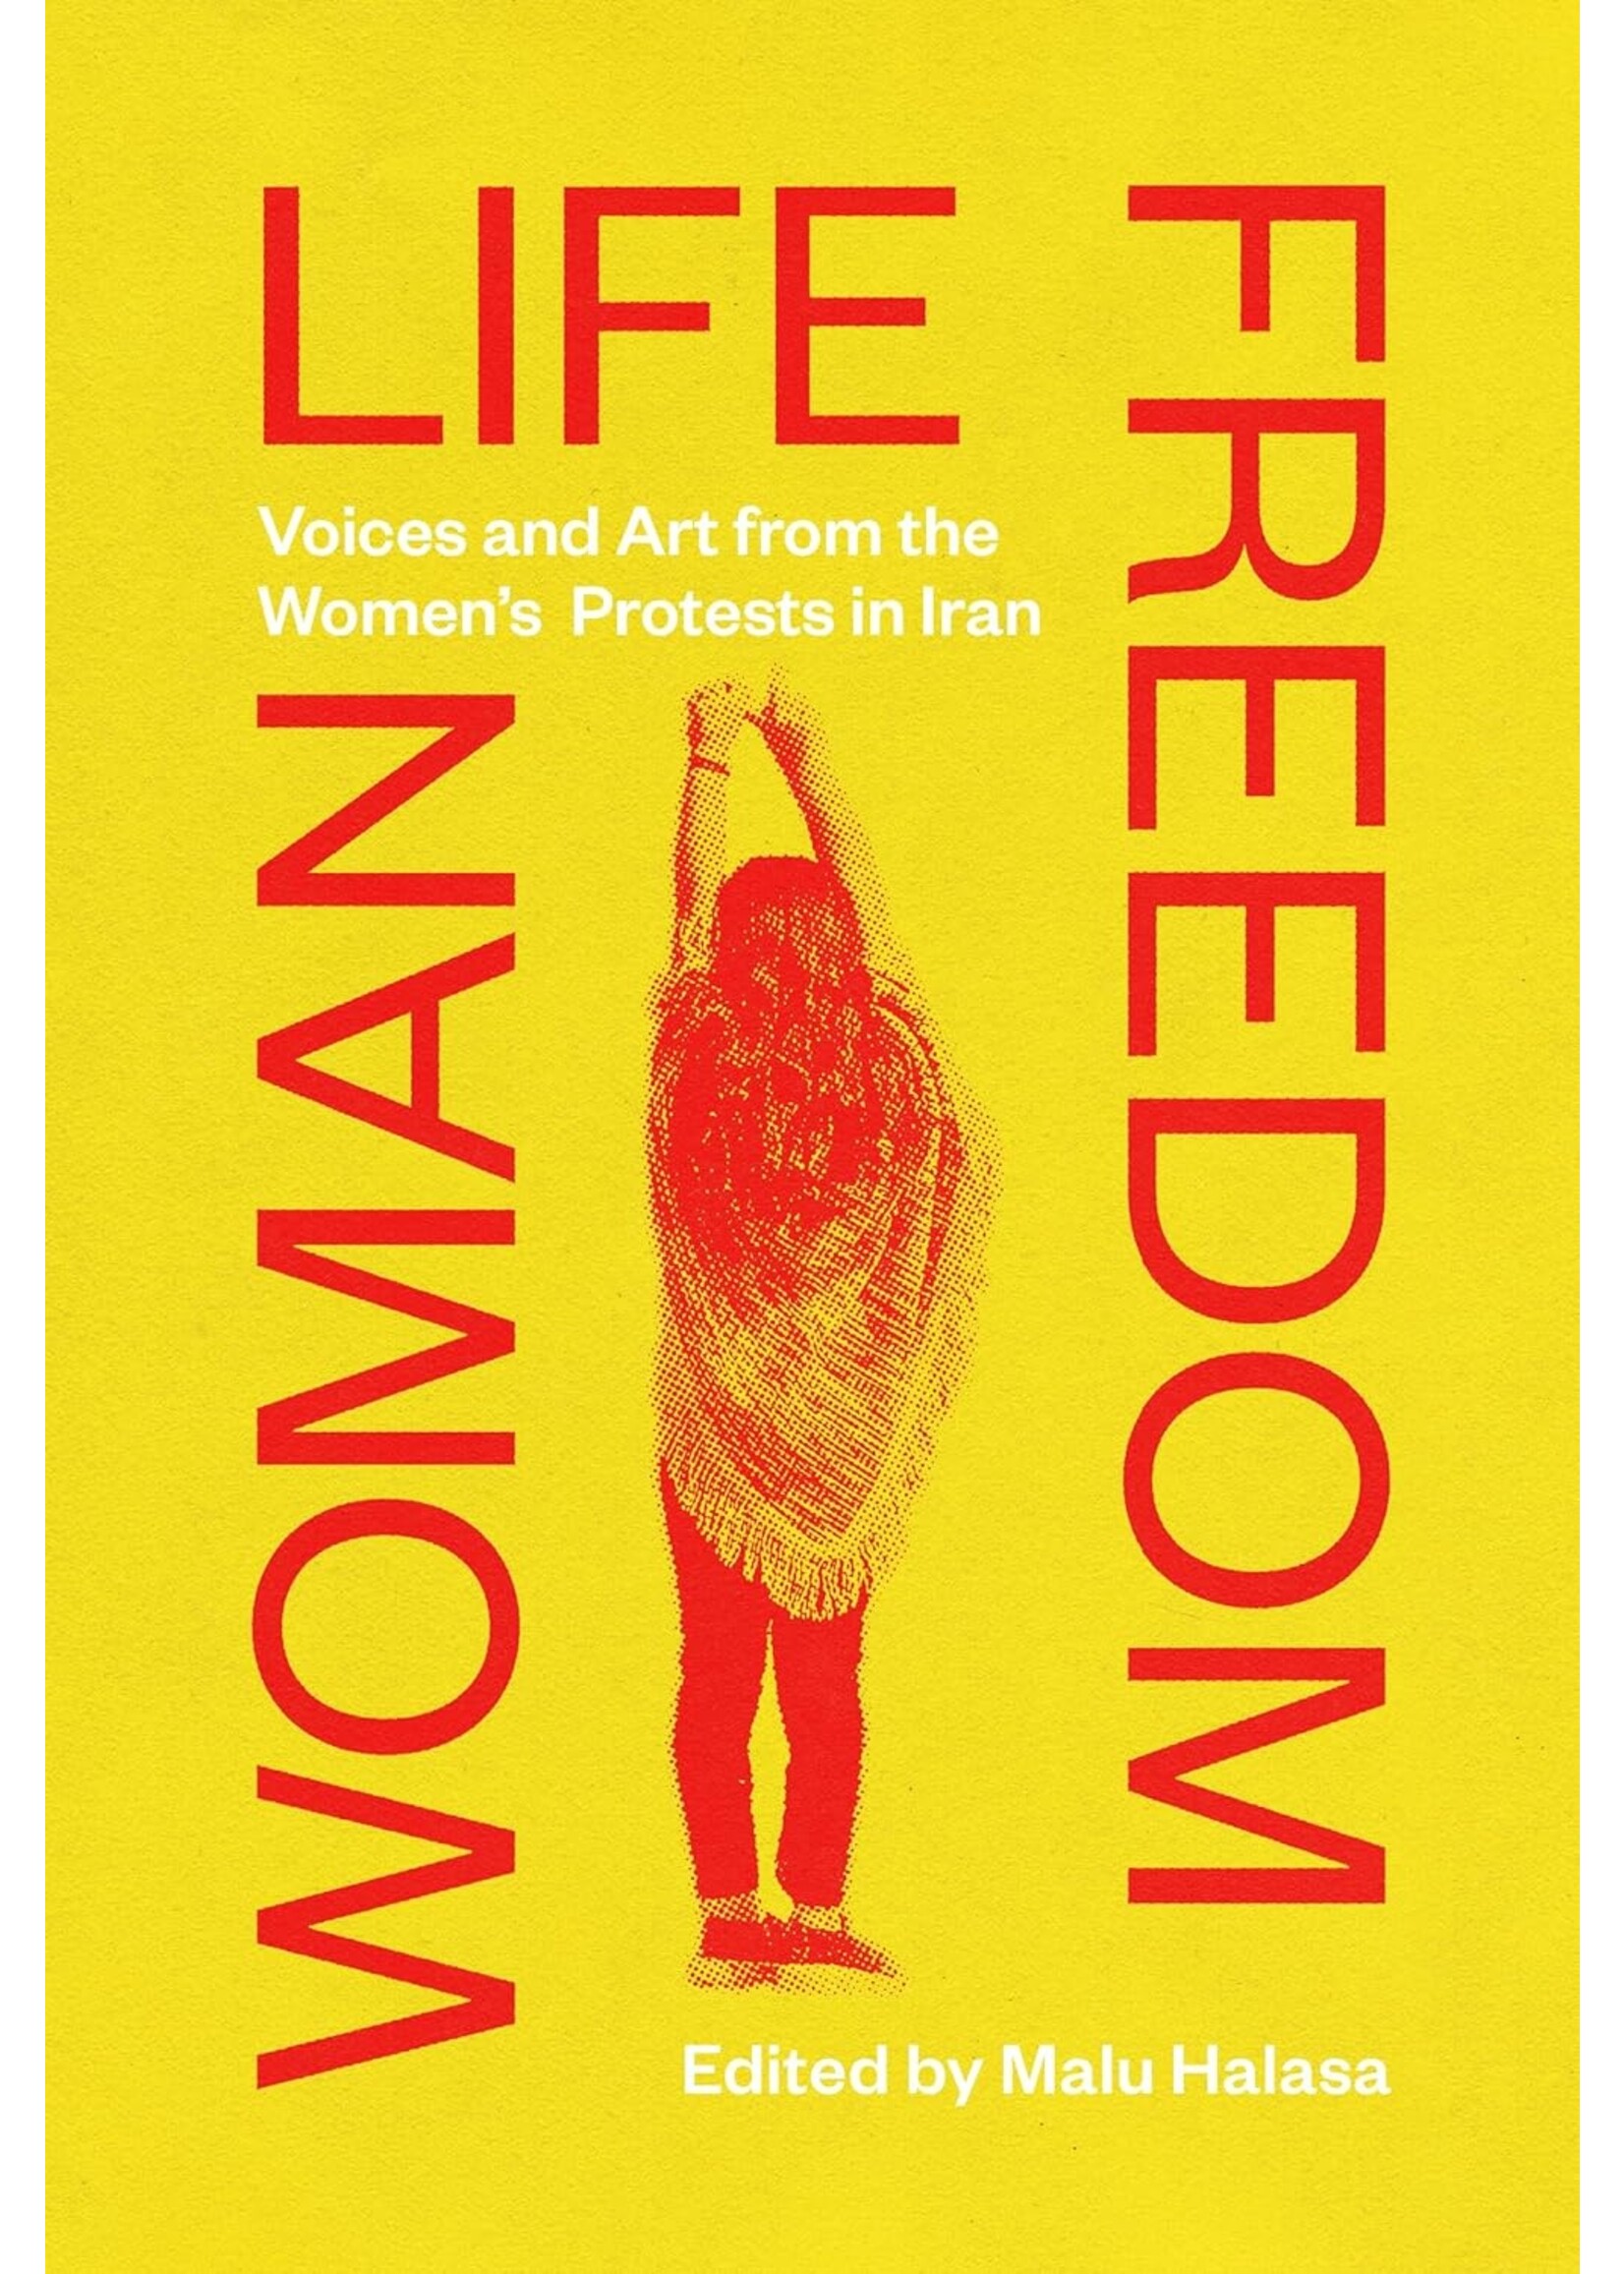 Woman, Life, Freedom: Voices and Art from the Women's Protest in Iran